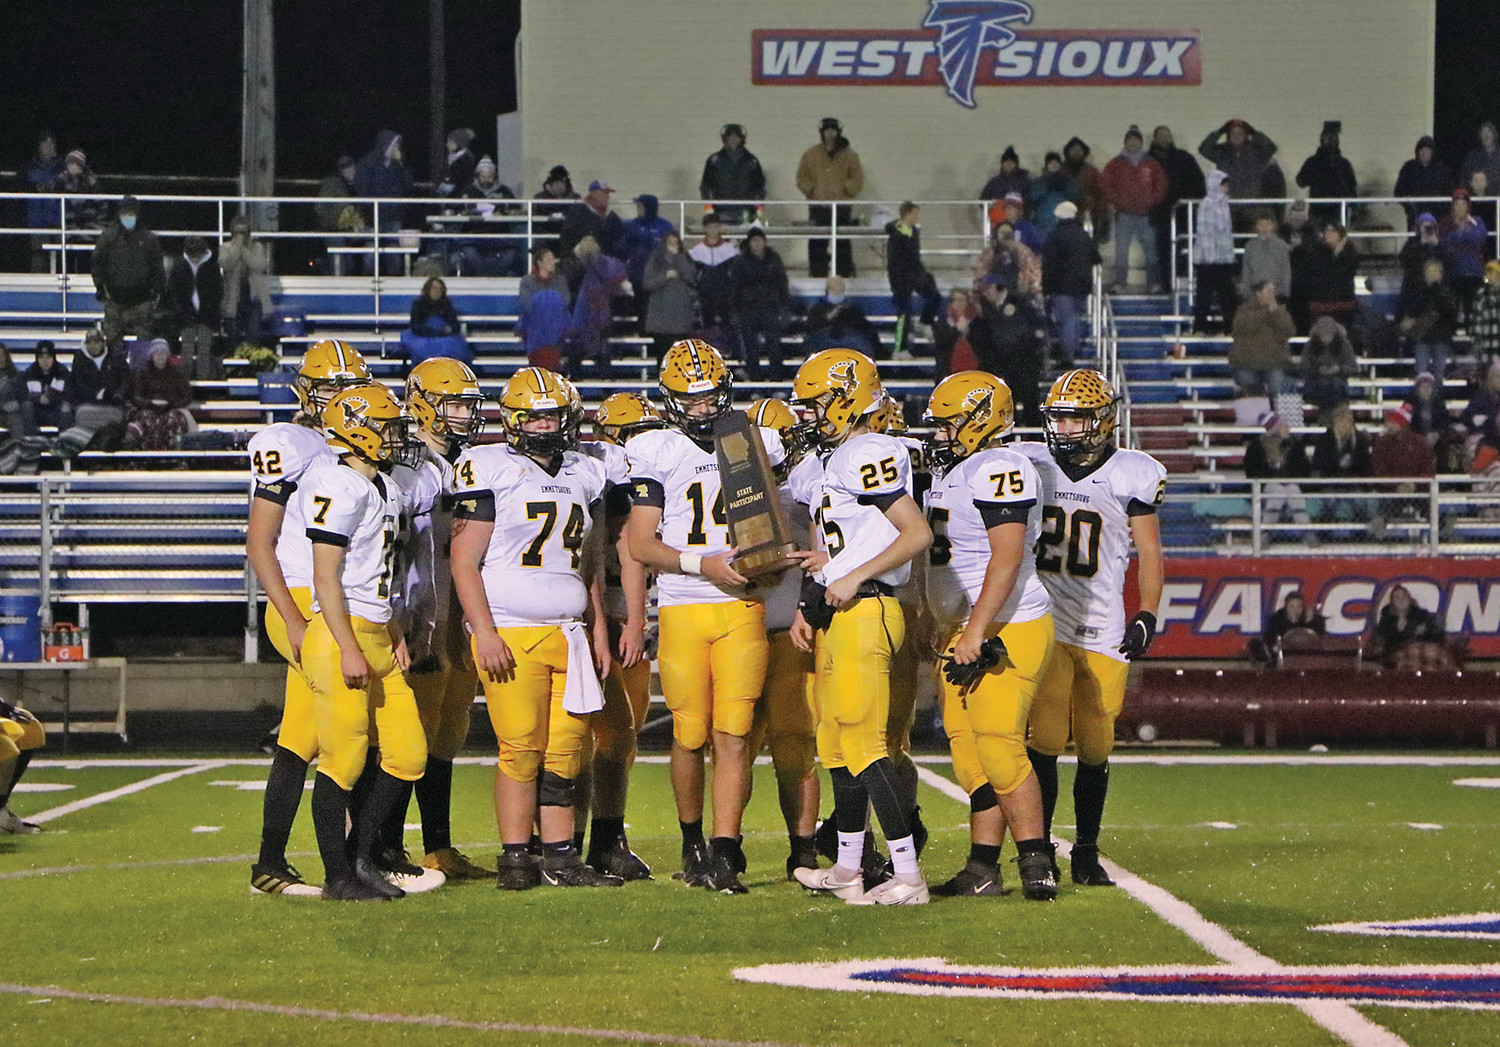 A CLASS ACT --  The E-Hawks would fall to West Sioux 35-16 in Friday night’s Class 1A third round playoff contest. Pictured above, after a great 7-2 season, Emmetsburg accepts the IHSAA participant trophy following Friday’s game.